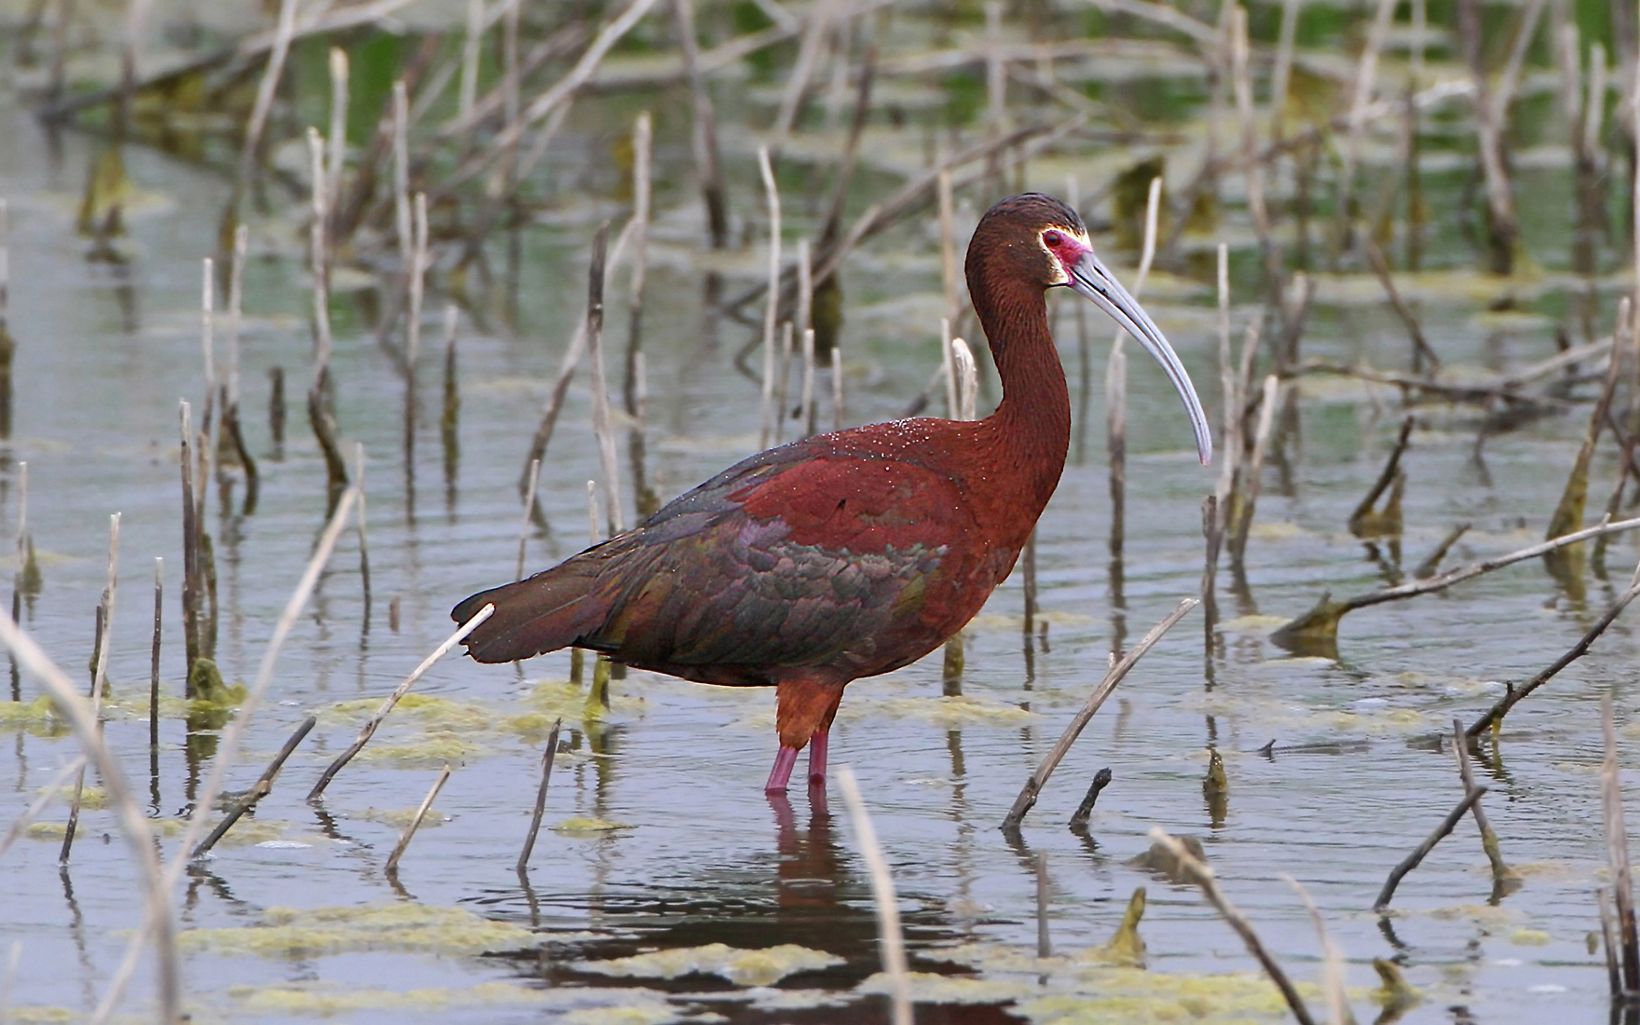 White-faced Ibis White-faced ibis migrate through Kansas on their way to wintering grounds in Mexico and Central America. © Tom Blandford